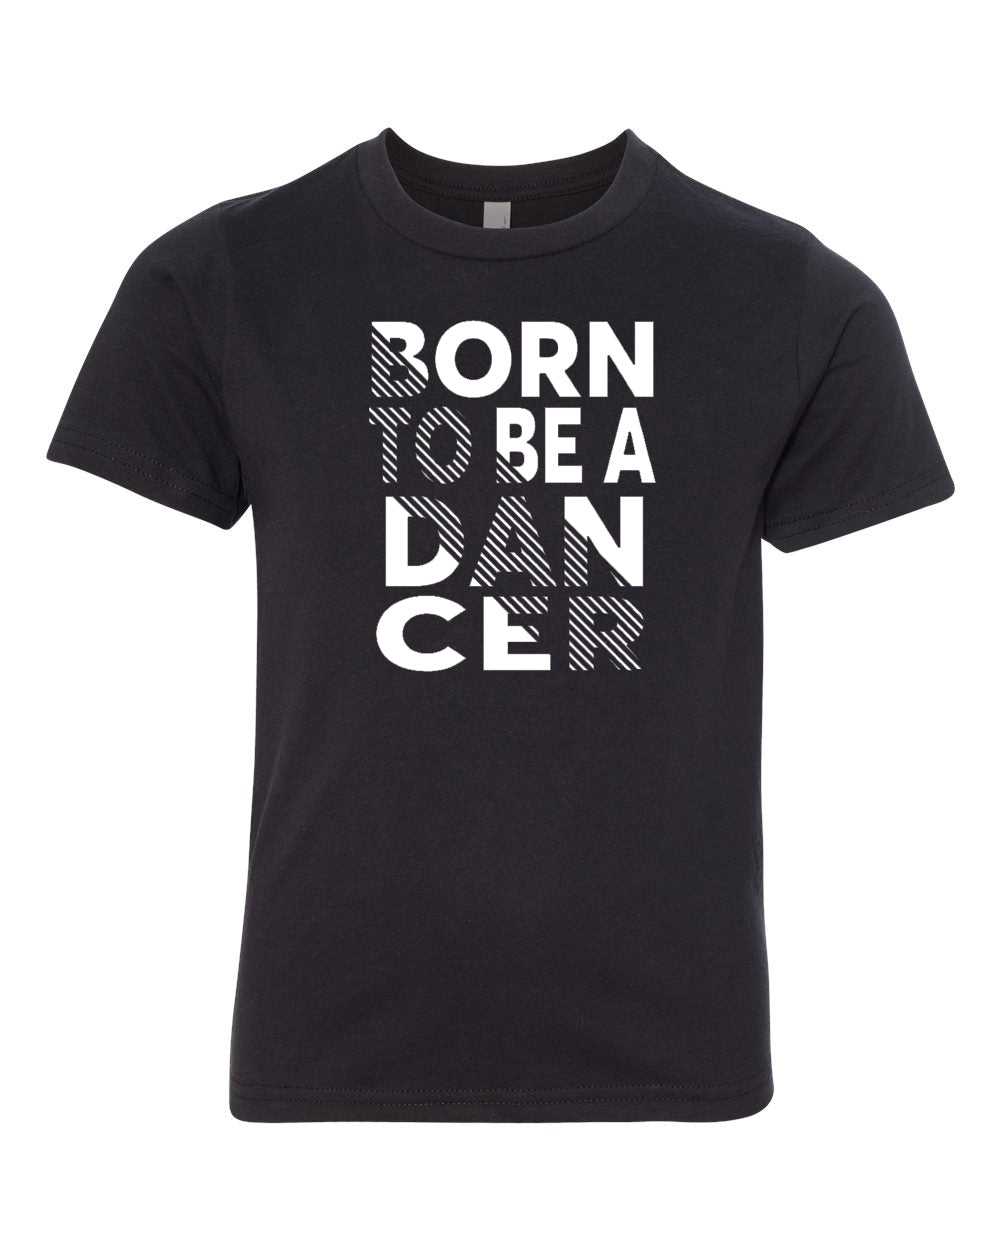 Born To Be A Dancer Youth T-Shirt